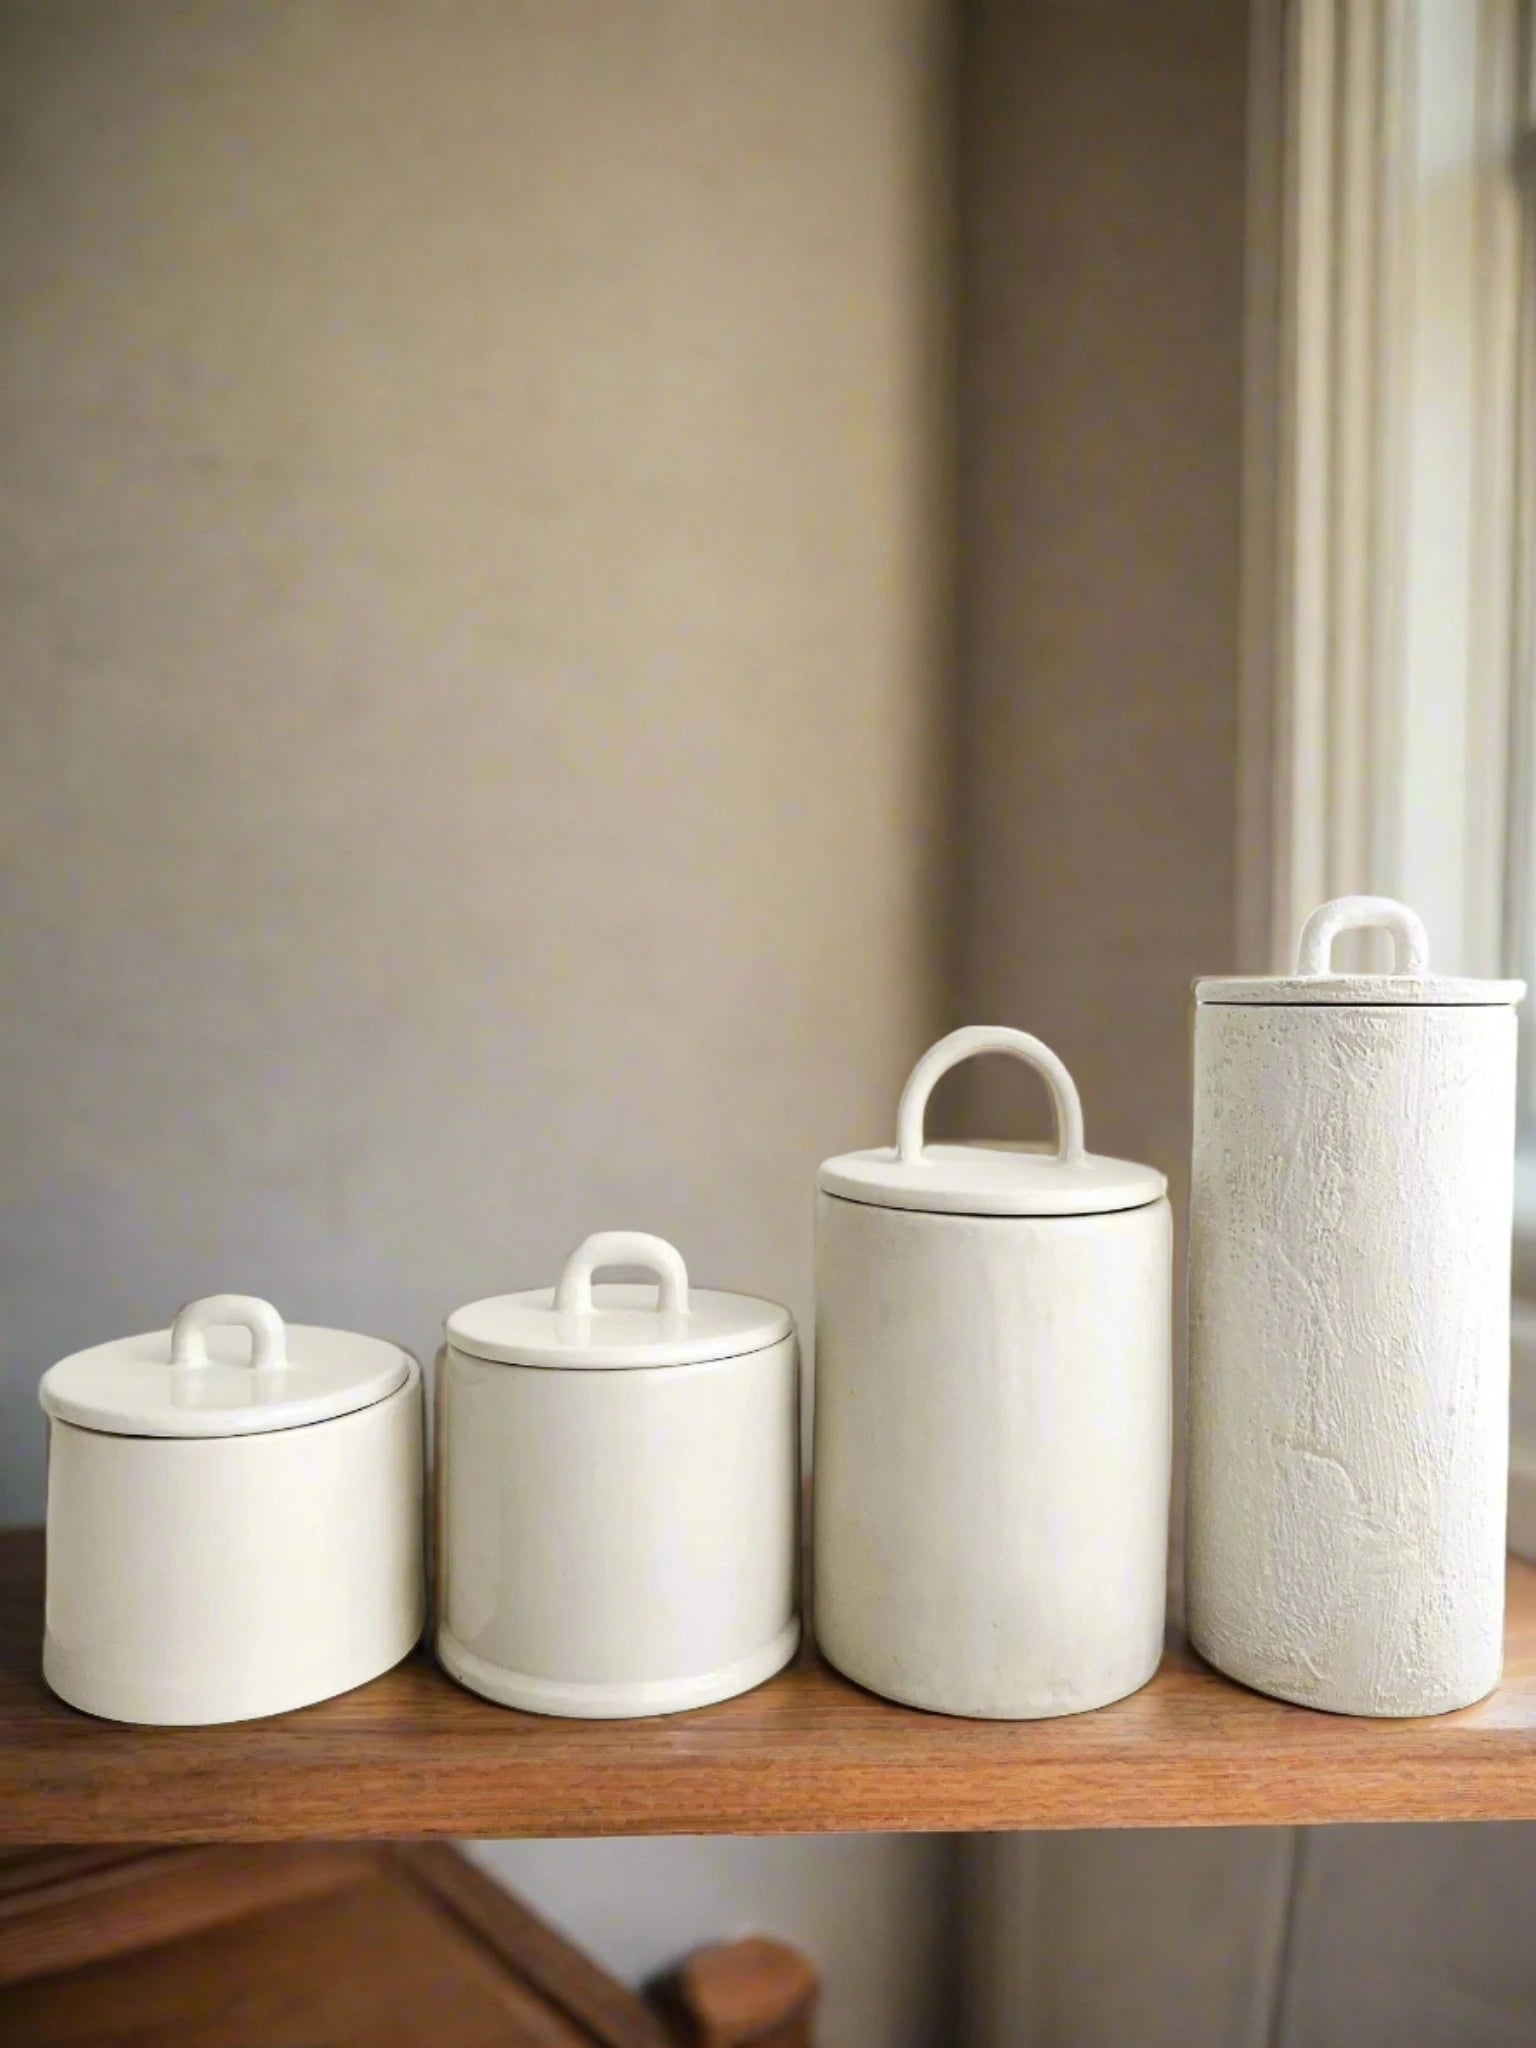 Customizable ceramic canisters for kitchen storage and decor